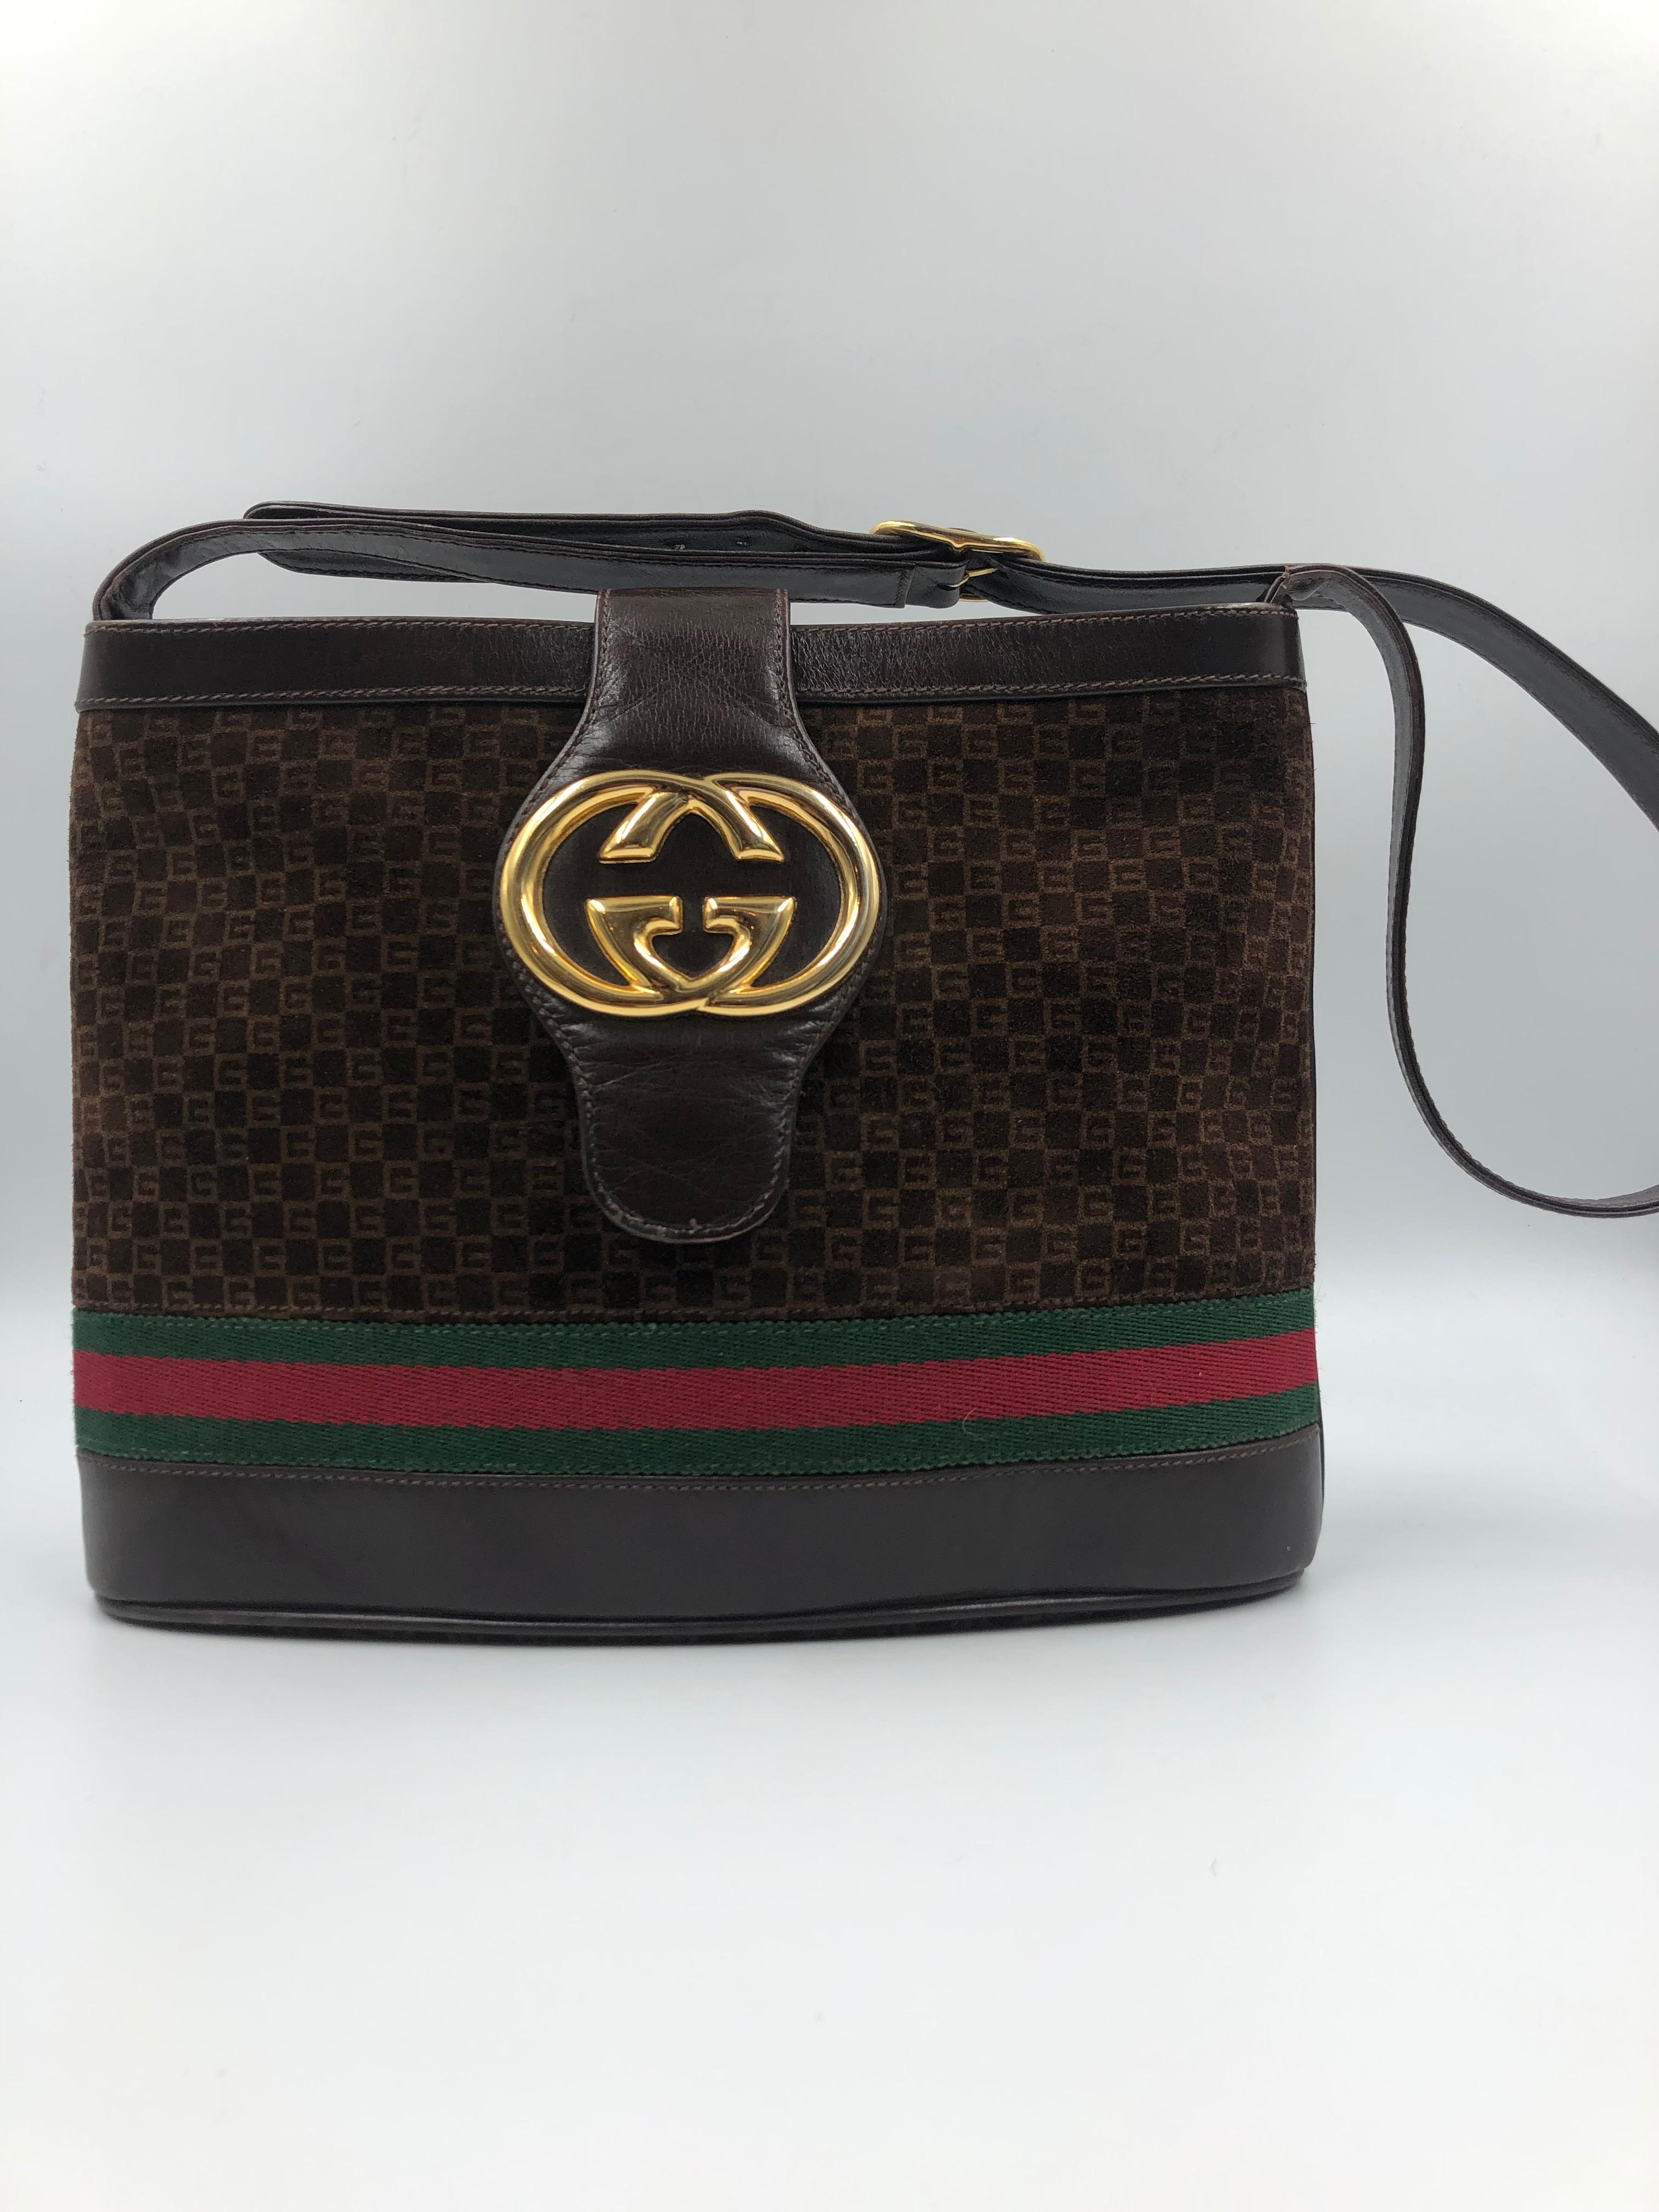 Gucci Brown Suede Bucket Bag with Leather Snap Closure 12